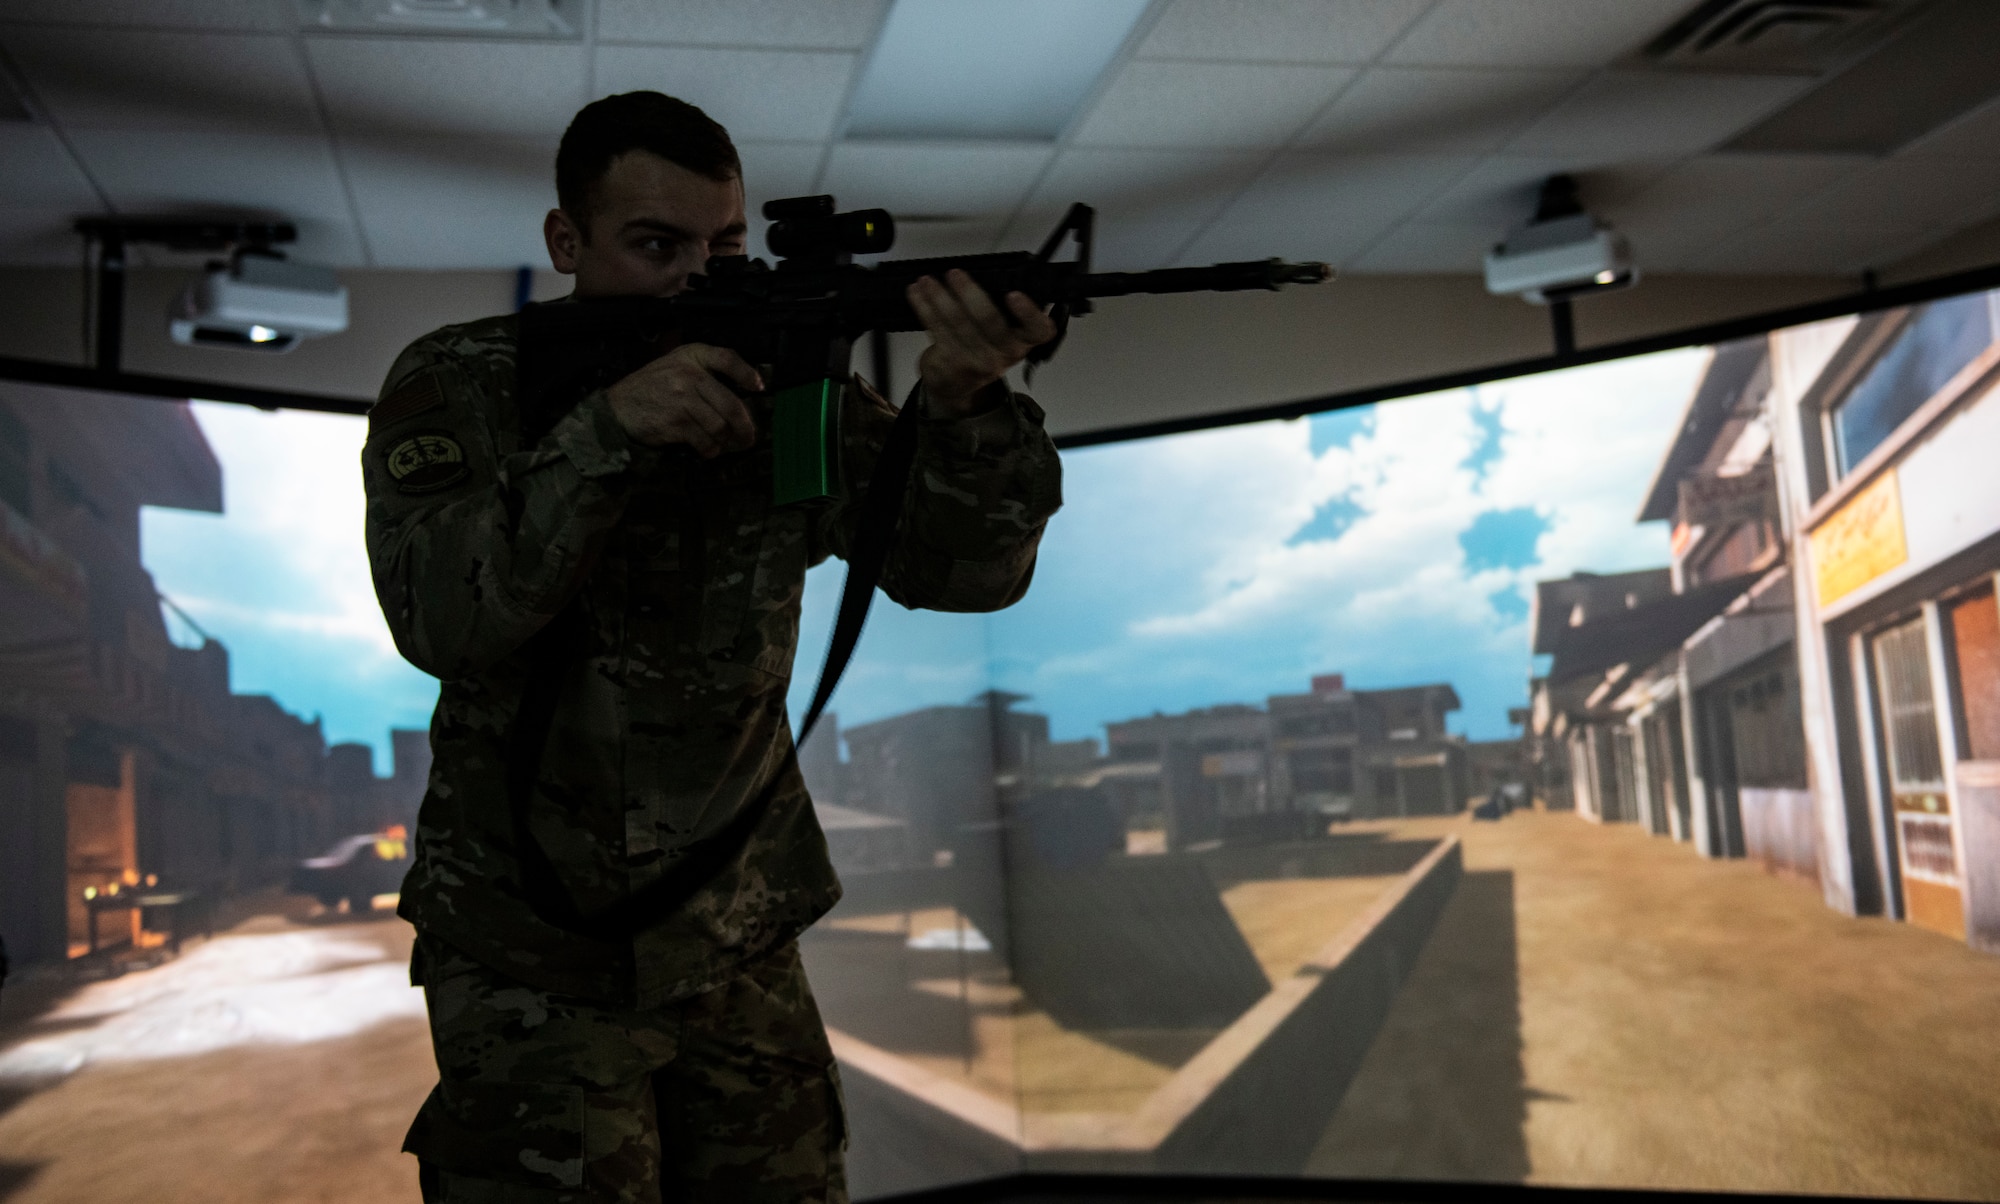 U.S. Air Force Staff Sgt. Thomas Badders, 325th Security Forces Squadron noncommissioned officer in charge of confinement, shoots at virtual targets at Tyndall Air Force Base, Florida, Feb. 5, 2020. Security Forces uses the Multiple Interactive Learning/Training Objectives Range to hone their skills without the need to fire live rounds. (U.S. Air Force photo by Senior Airman Stefan Alvarez)